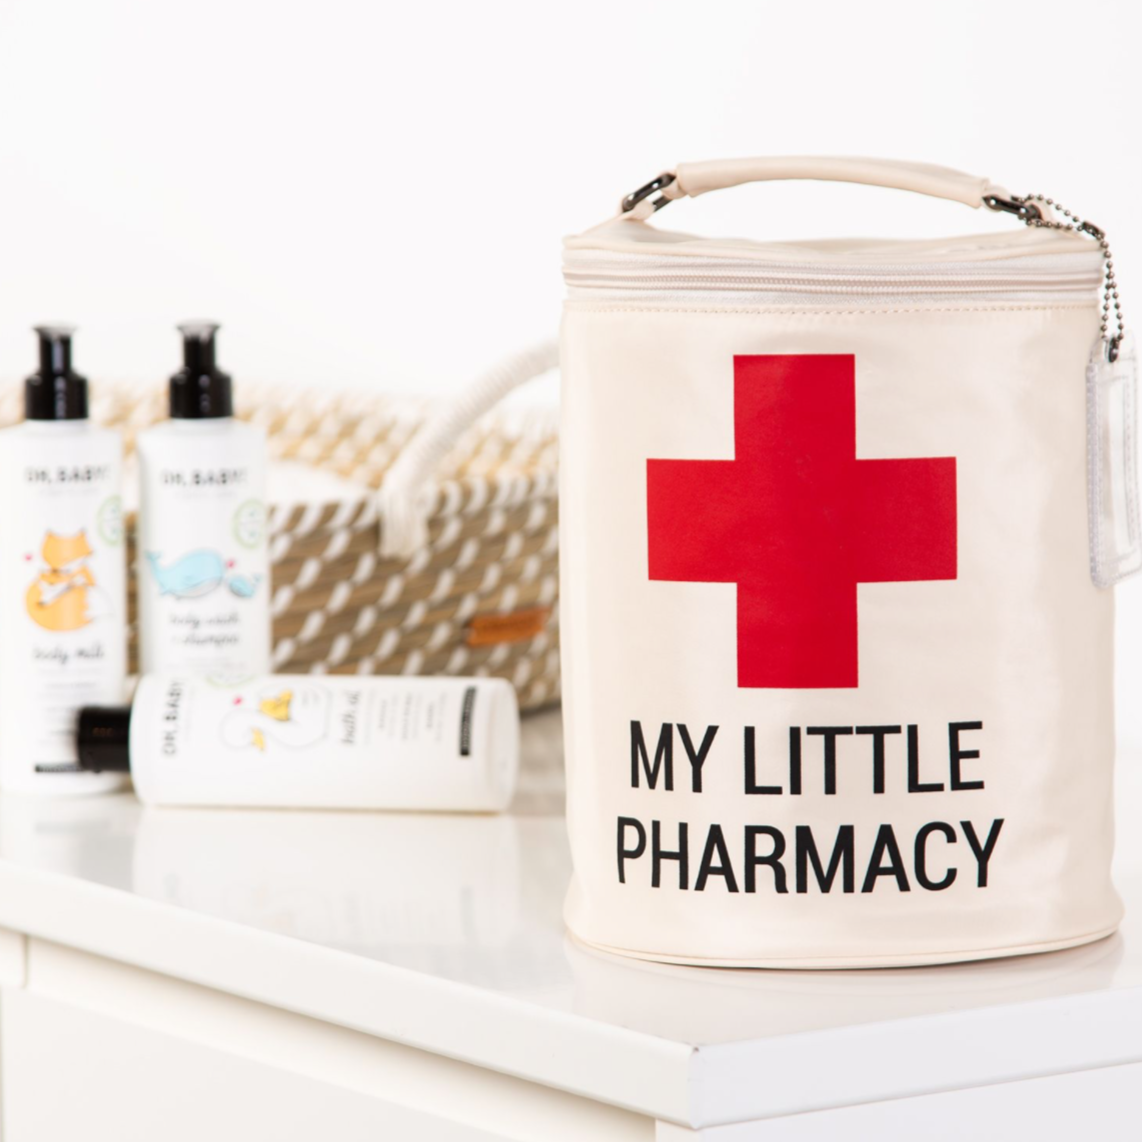 My Little Pharmacy - Childhome